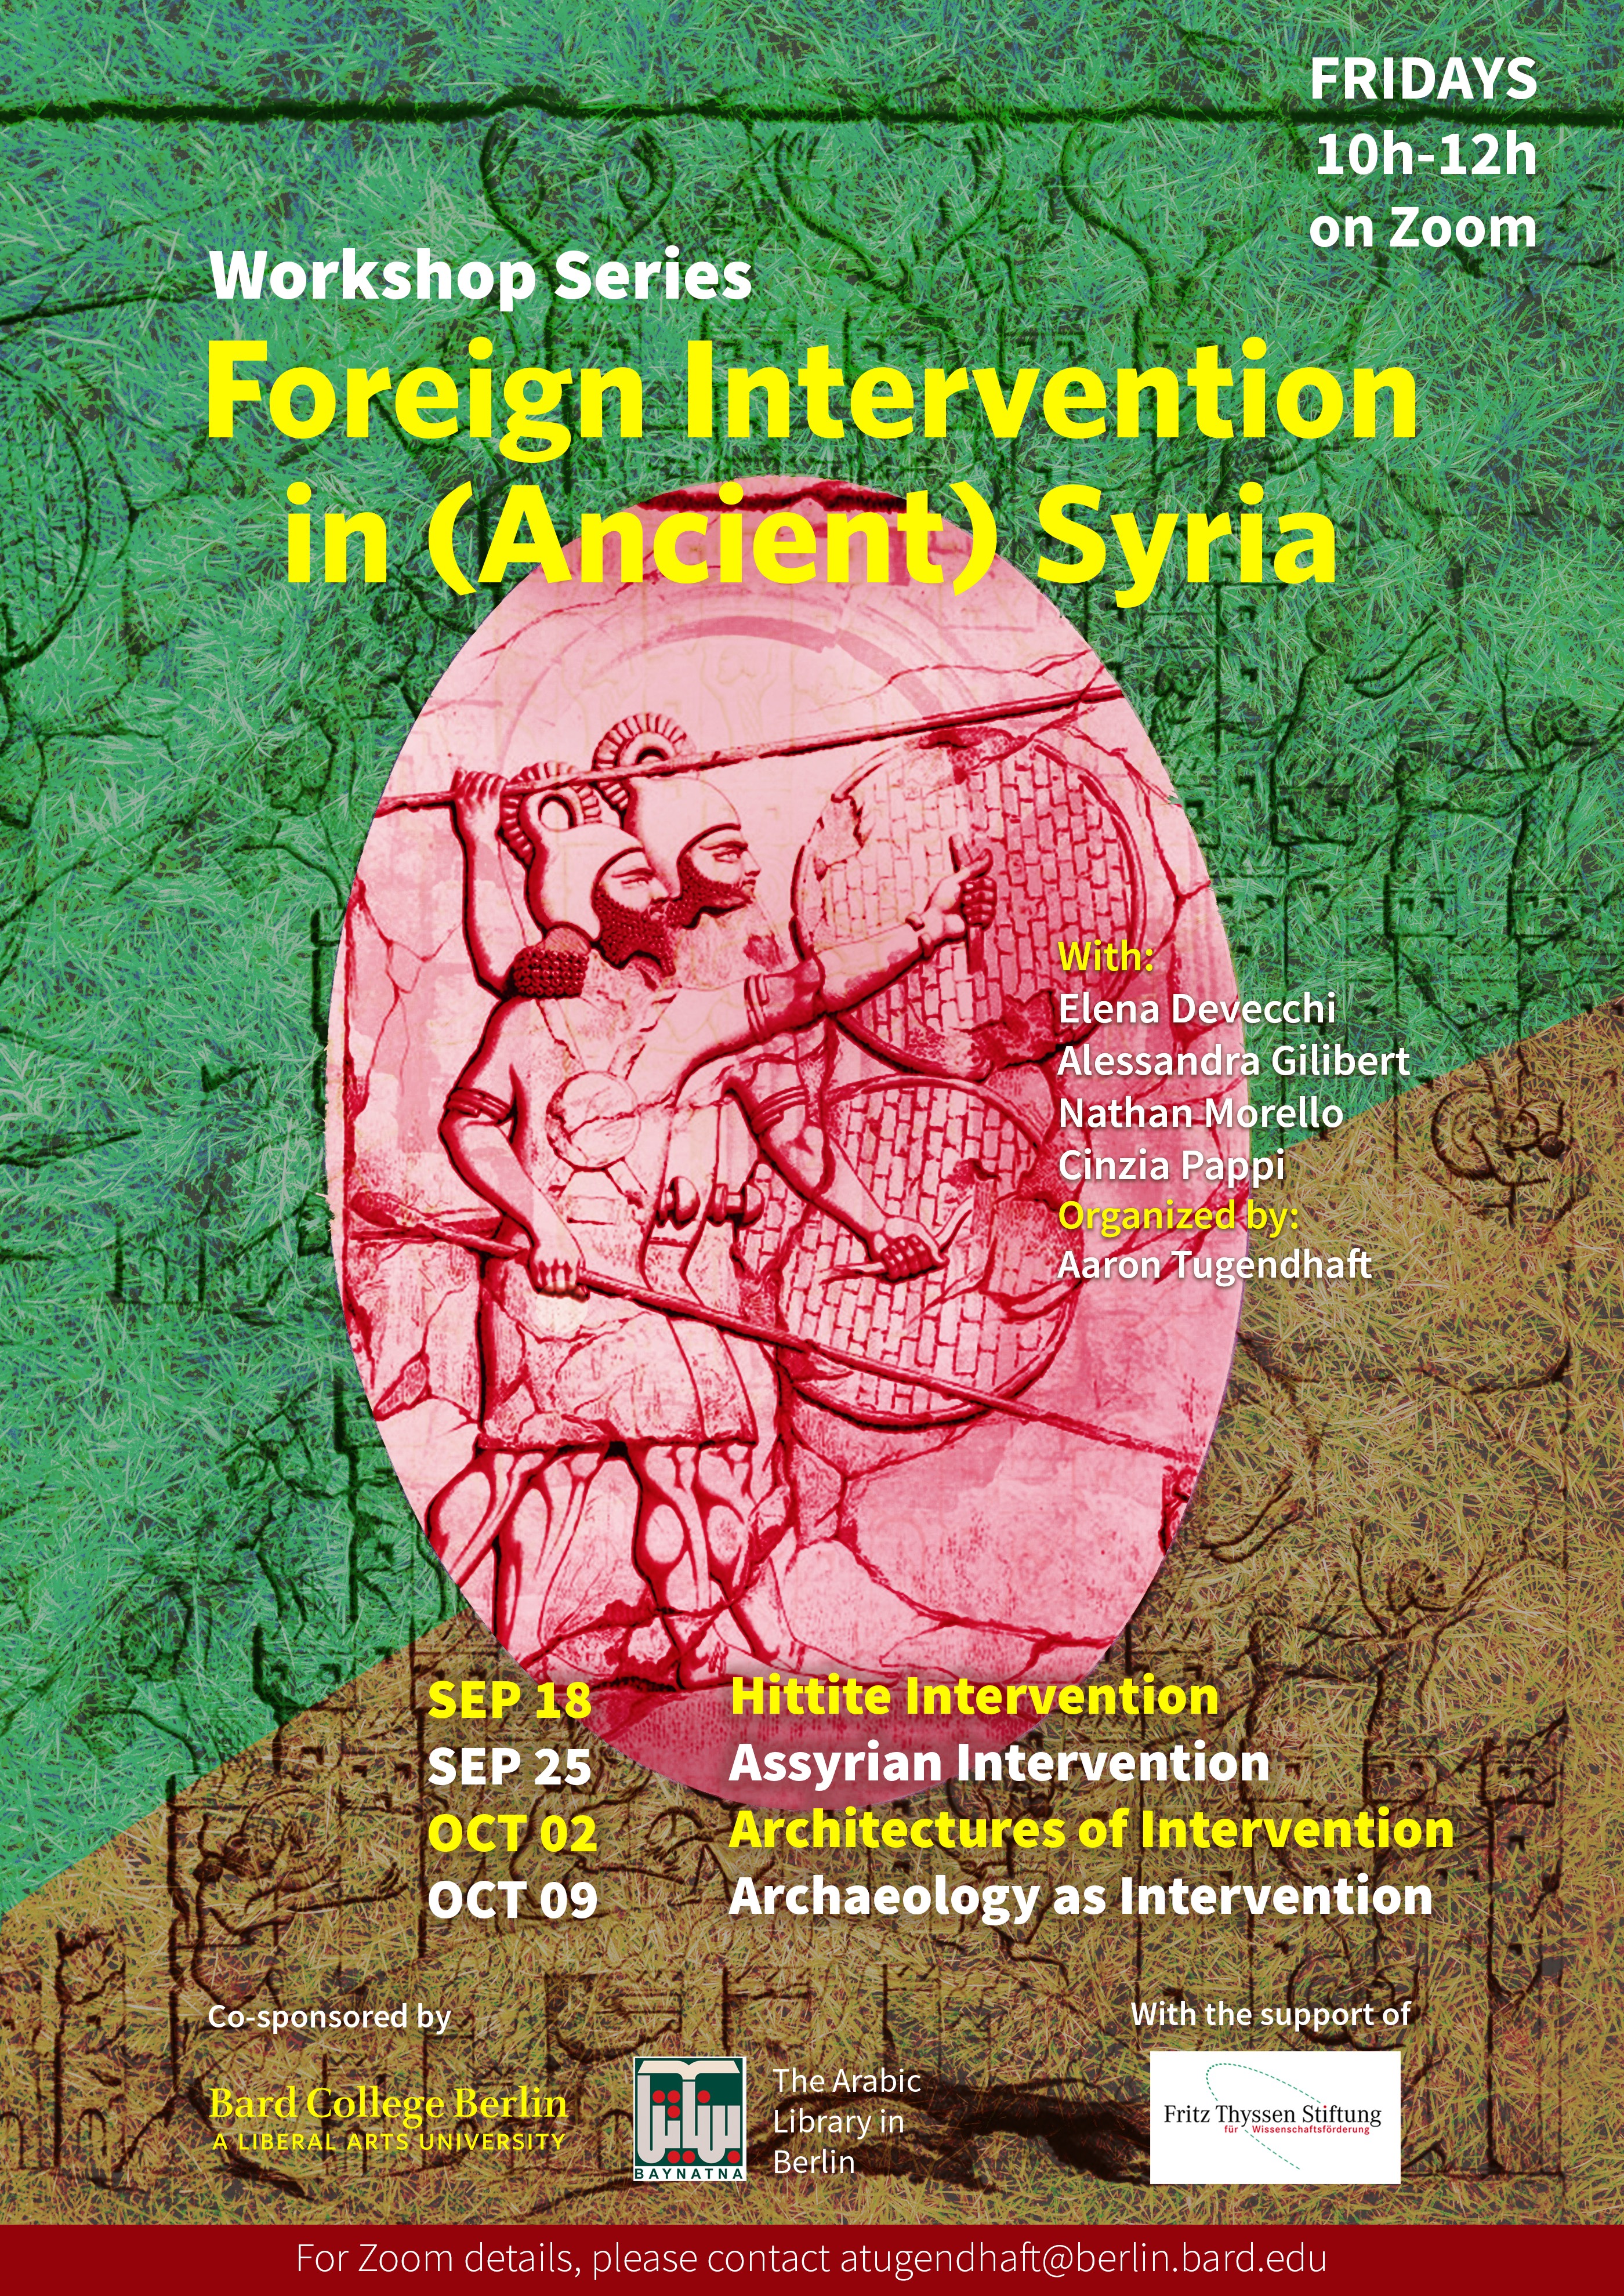 Architectures of Intervention&nbsp;- Part III of the Workshop Series Foreign Intervention in (Ancient) Syria